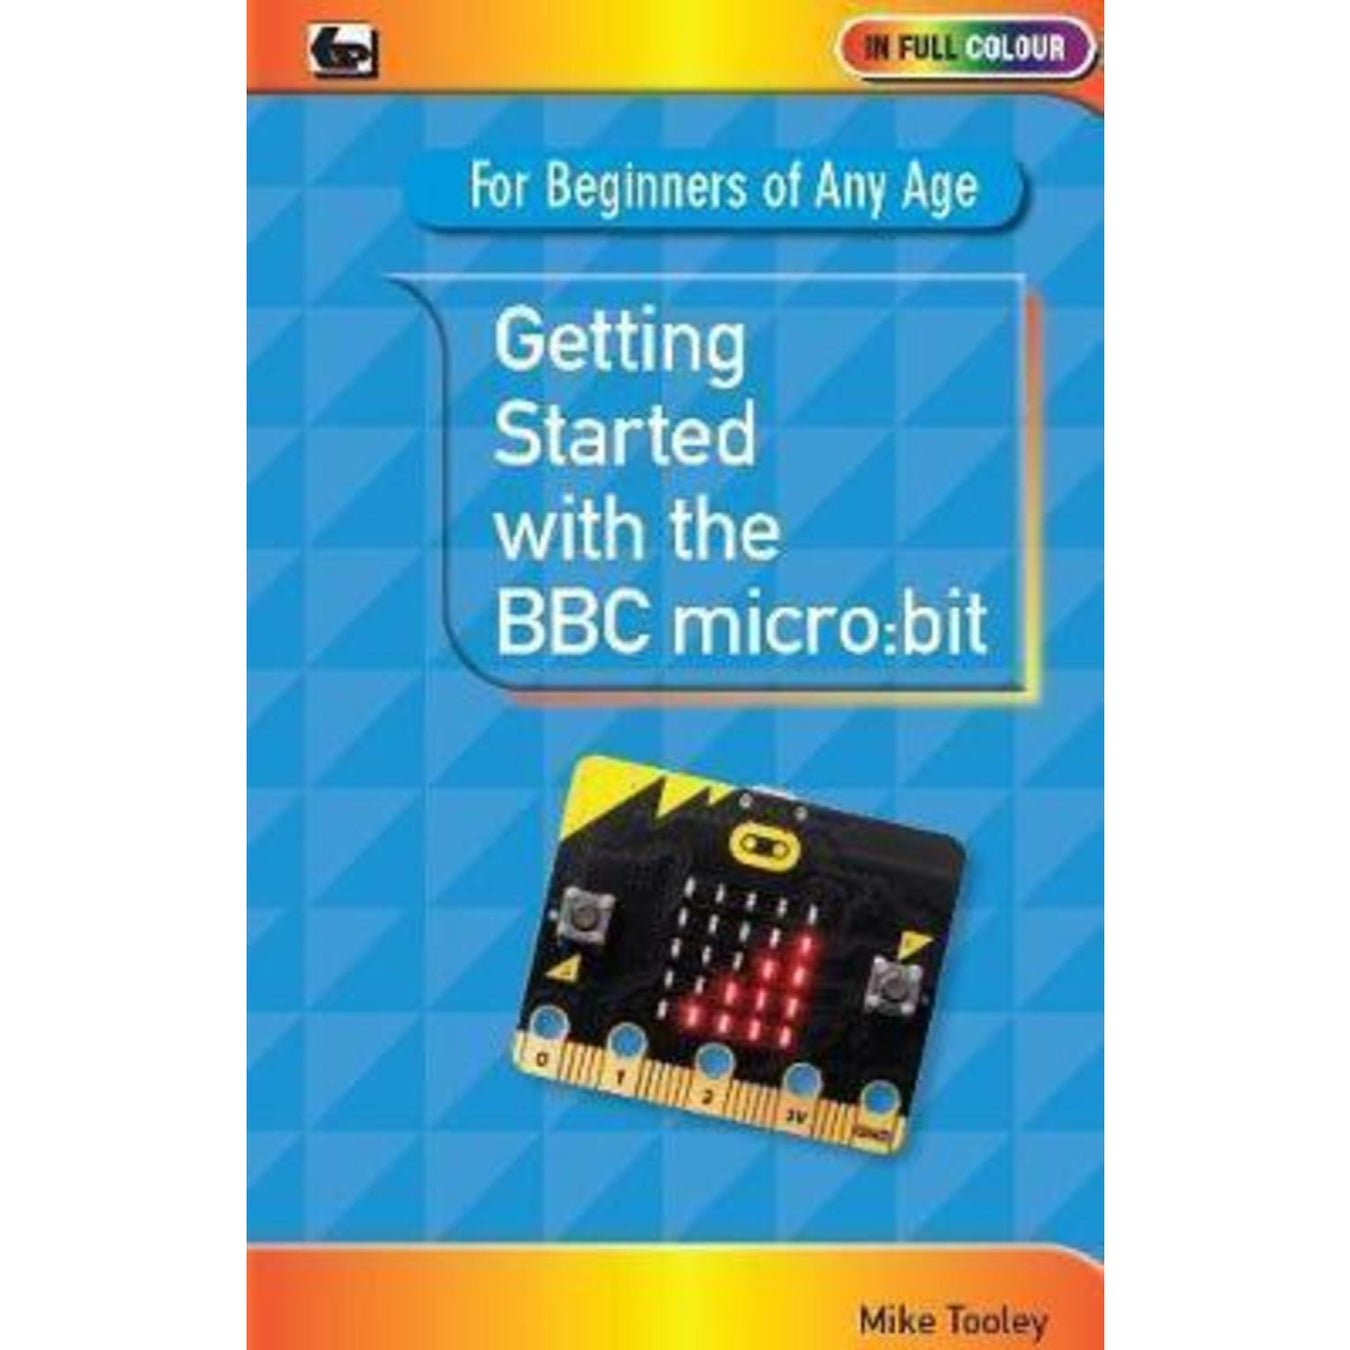 Micro:bit Books and Learning Resources